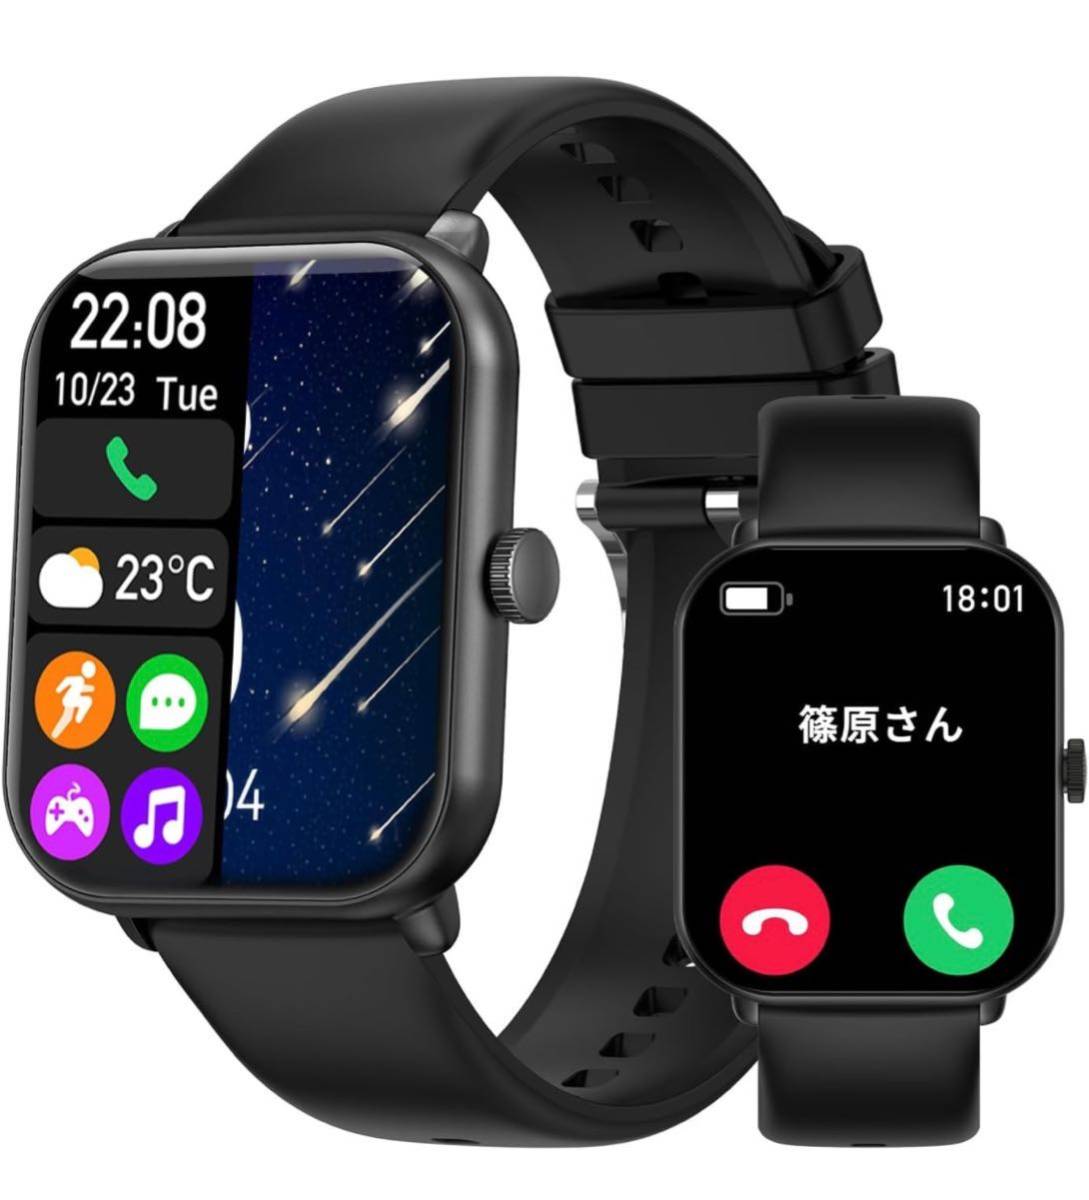  smart watch 1.96 -inch screen &10 day continuation use Bluetooth5.3 telephone call music reproduction sport watch pedometer sound telephone call IP67 waterproof iPhone/Android correspondence 